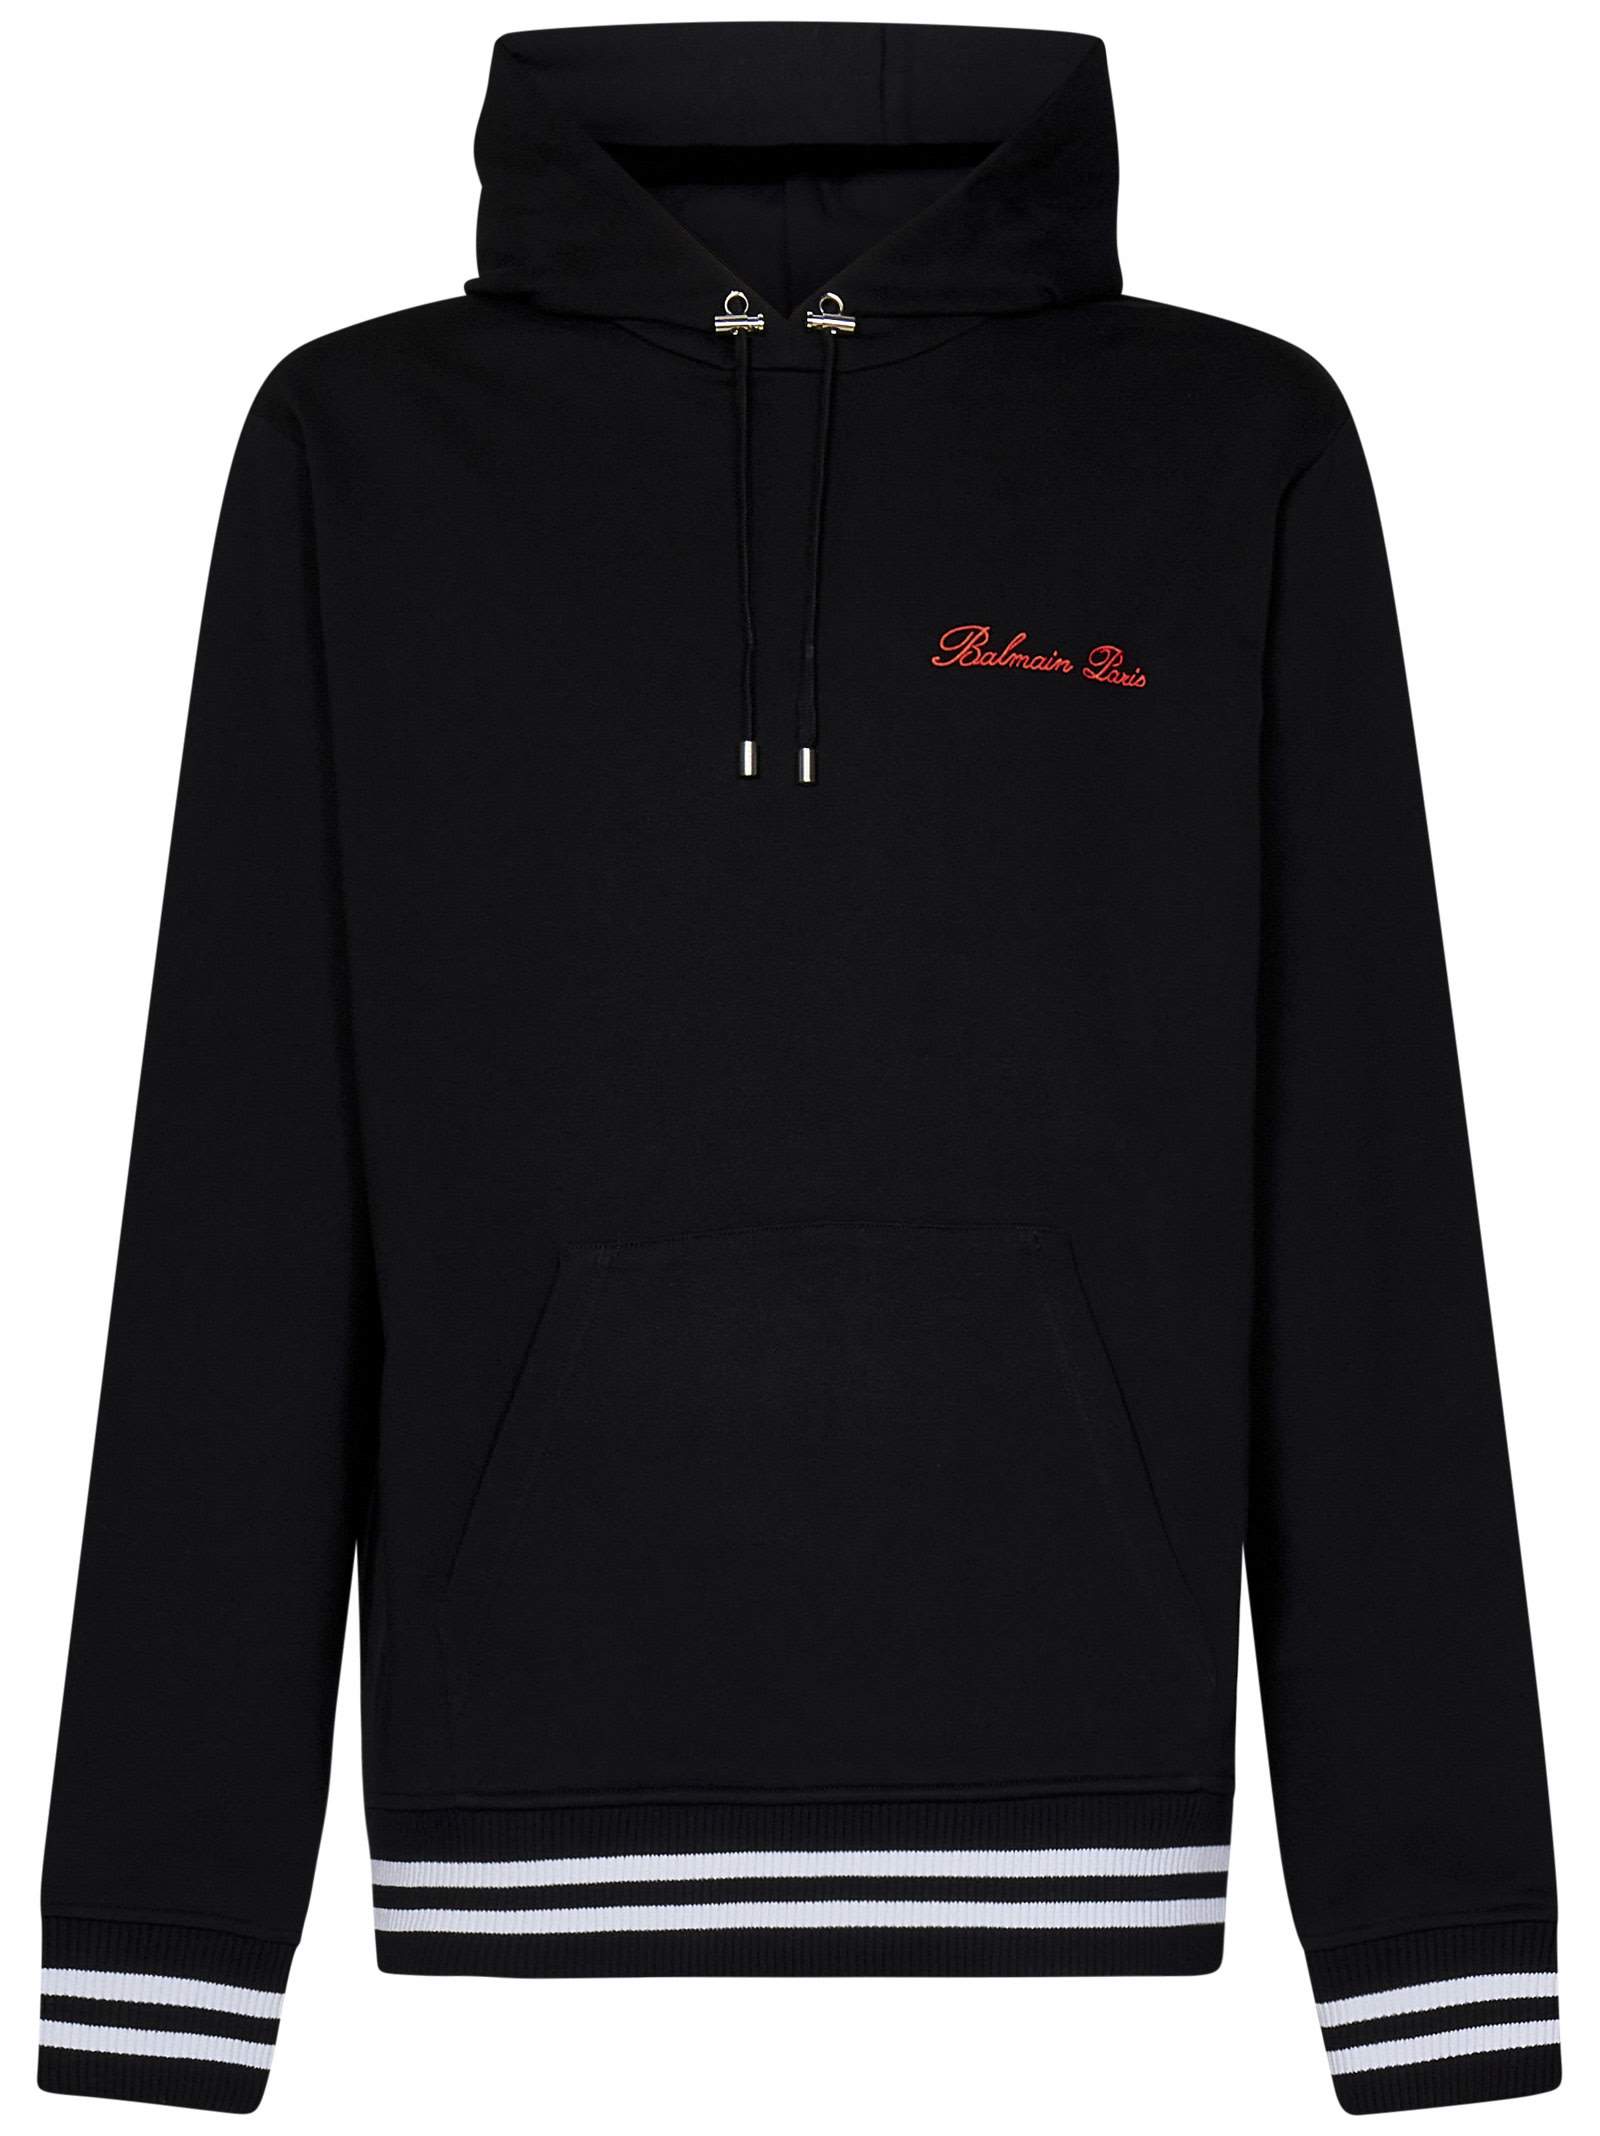 Signature Embroidered Drawstring Hoodie